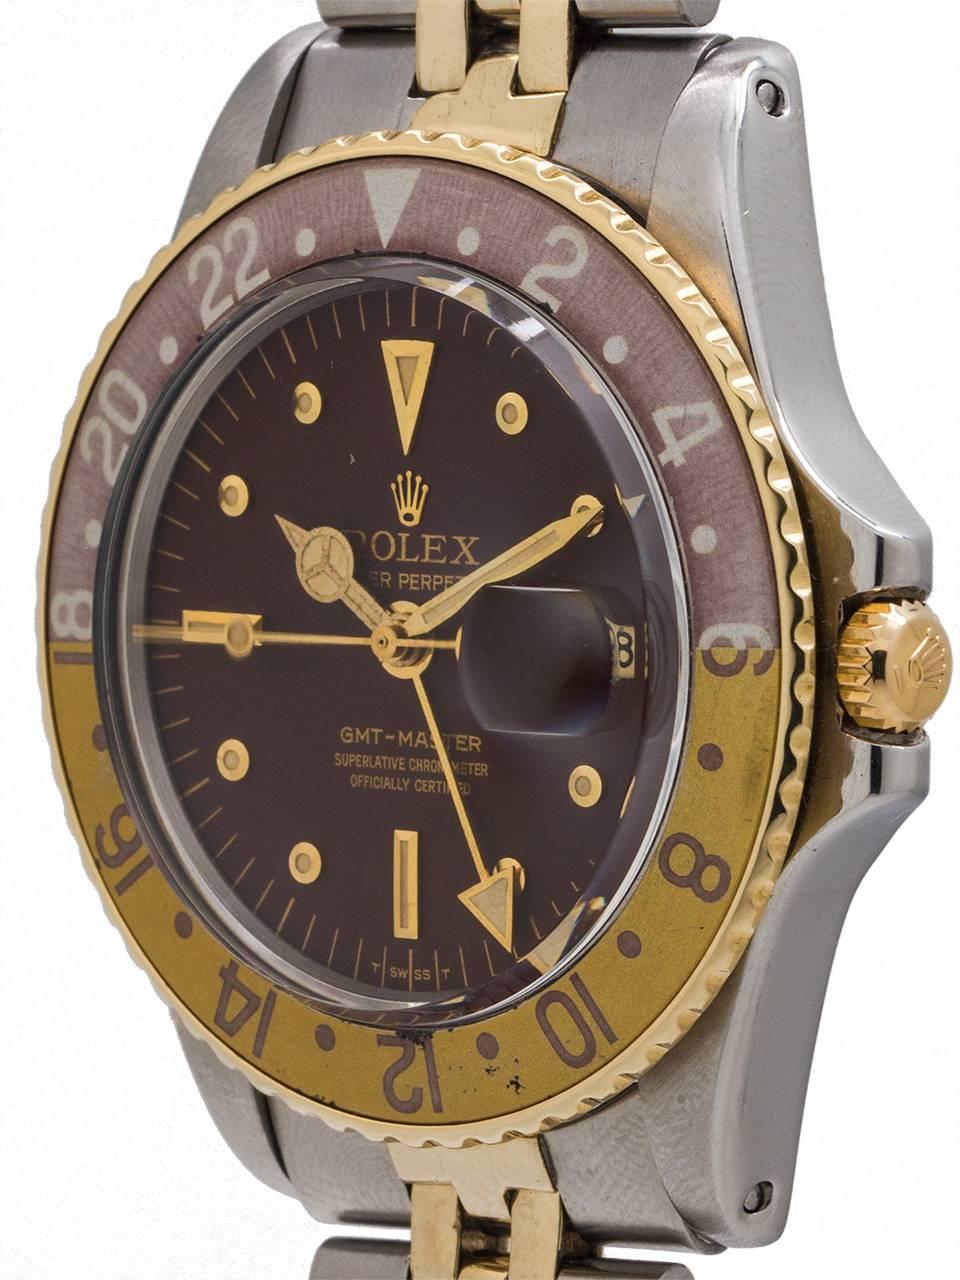 
Rolex SS/14K YG GMT ref# 1675 serial #2.7 million circa 1971. Featuring a 40mm diameter case with a nicely faded 24 hour gold and bronze bezel, acrylic crystal, and beautiful condition original chocolate “radial” dial with applied gold nipple